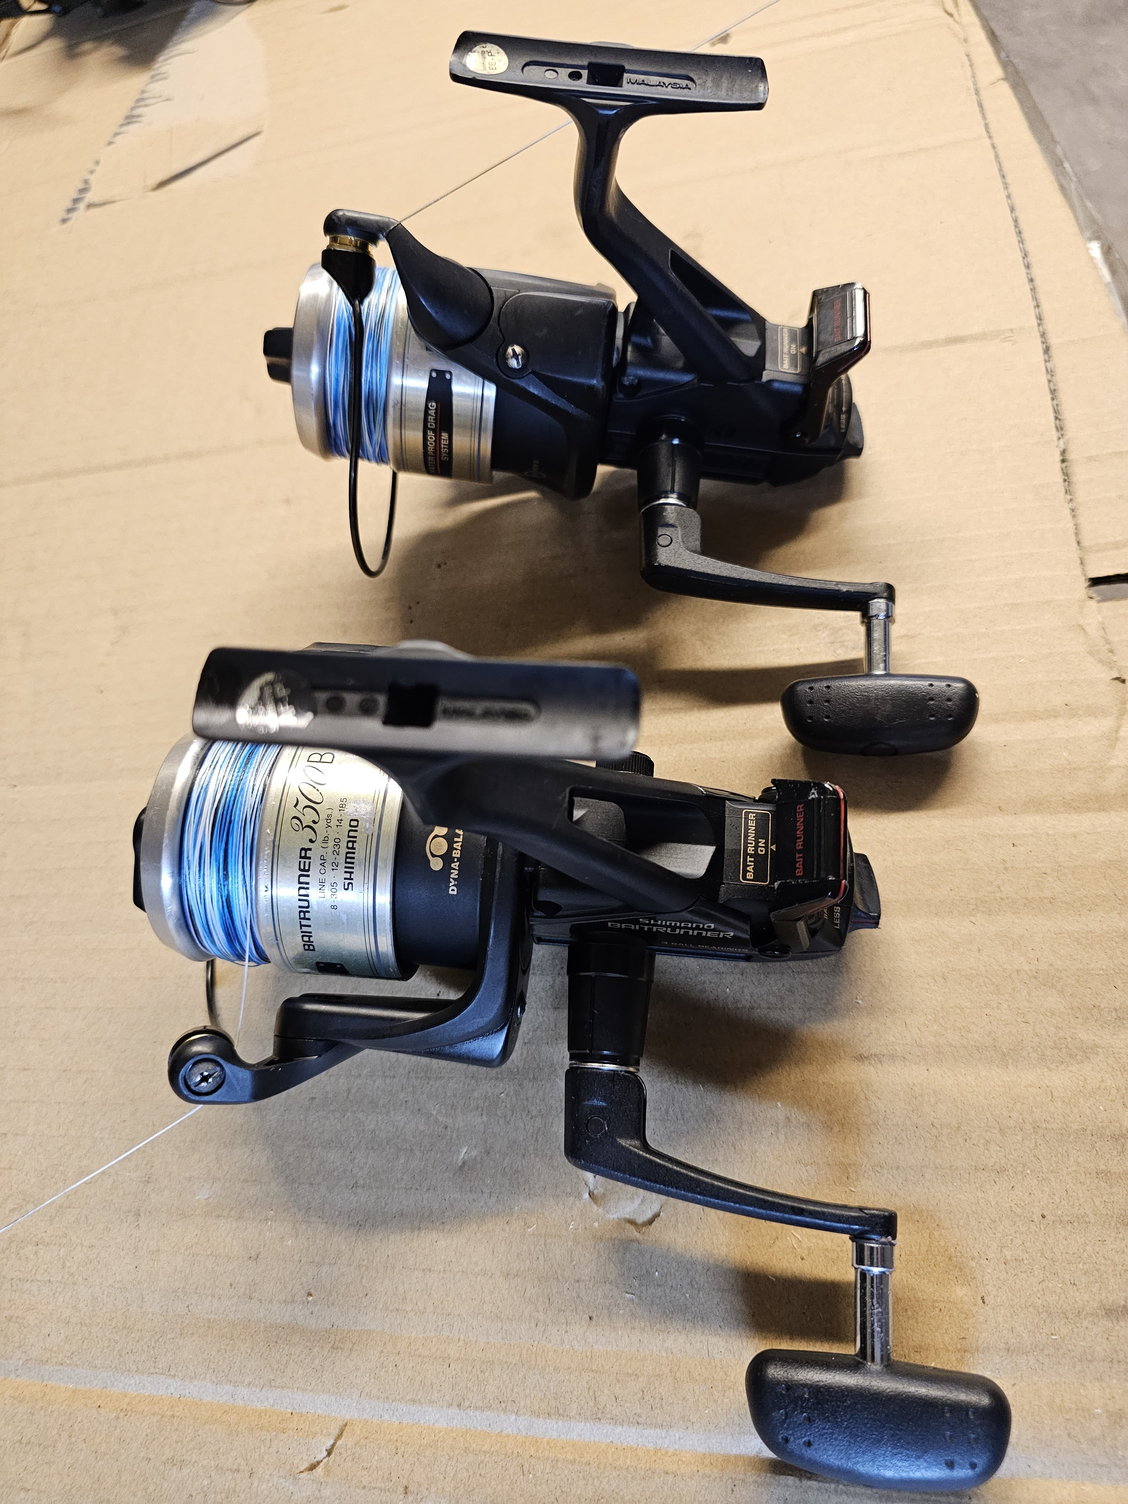 Shimano Baitrunner 4500B sold - The Fishing Website : Discussion Forums